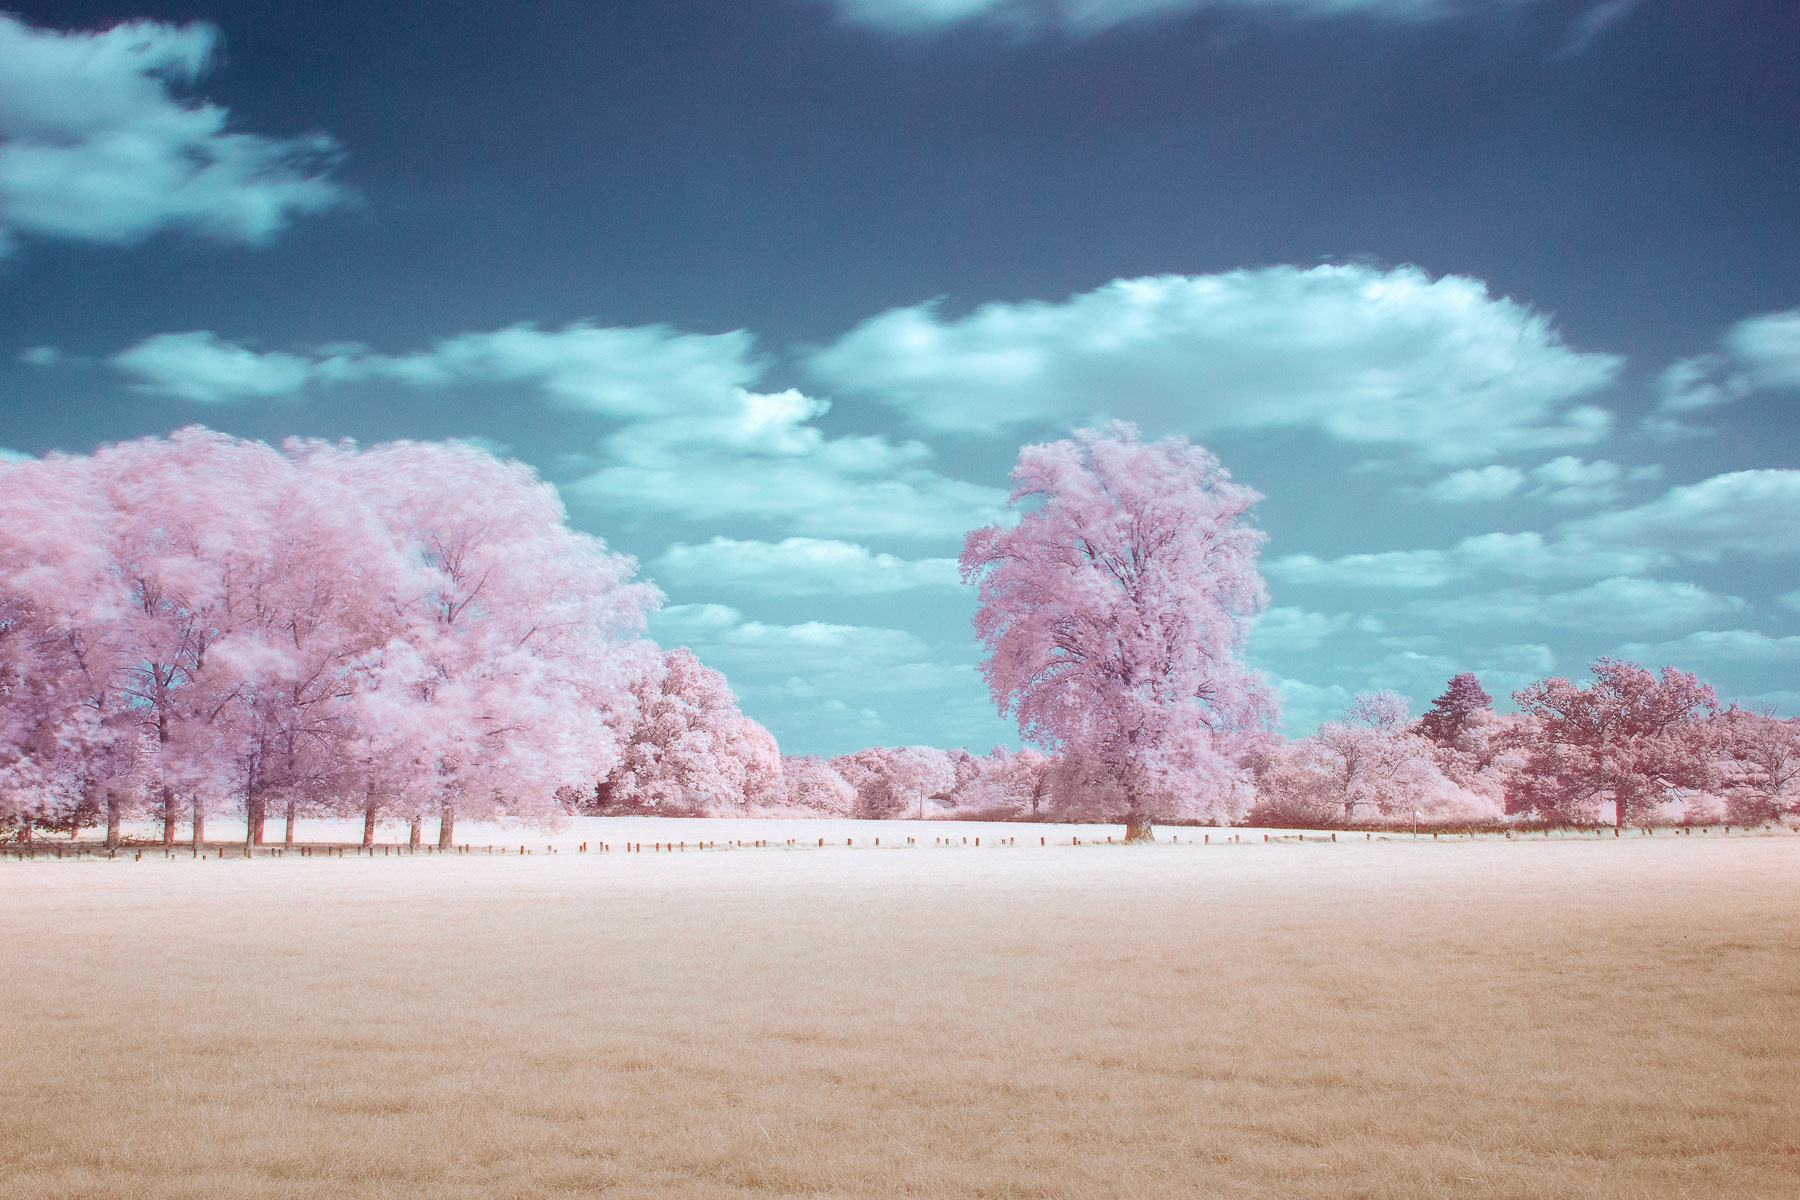 HOYA | Reviews - Infrared photography with the HOYA R72 filter